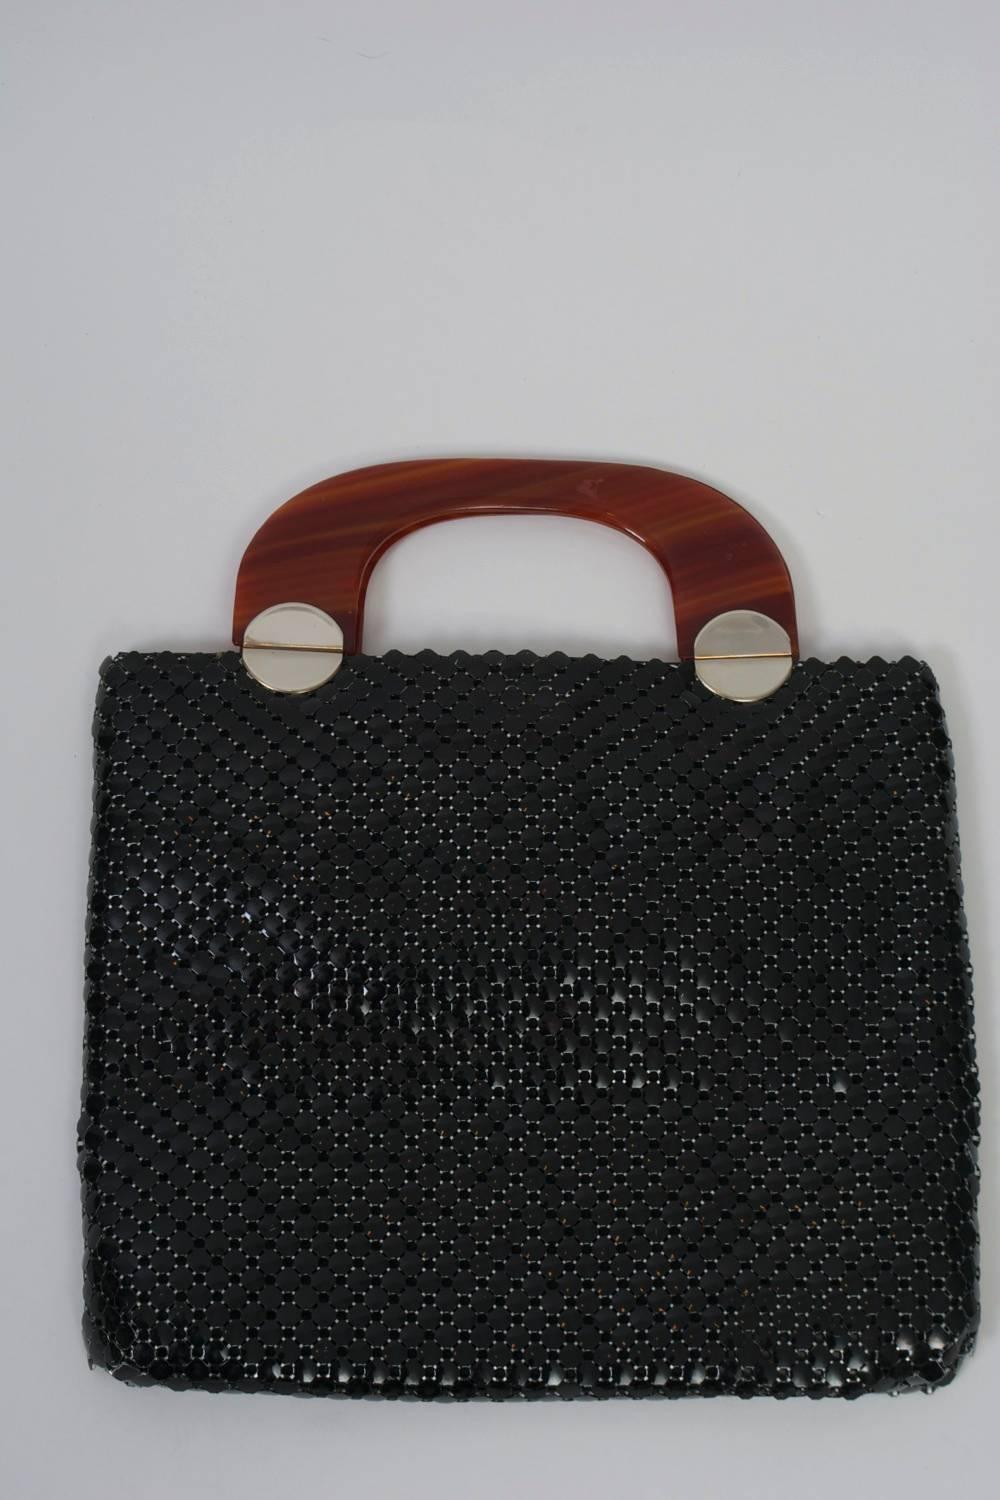 A rare modern design from Whiting & Davis, this 1960s tote ifeatures a large-gauge black mesh and tortoise shell handles with circular gold metal hinges, a motif repeated as a decorative touch on the front of the bag. Interior has side compartment